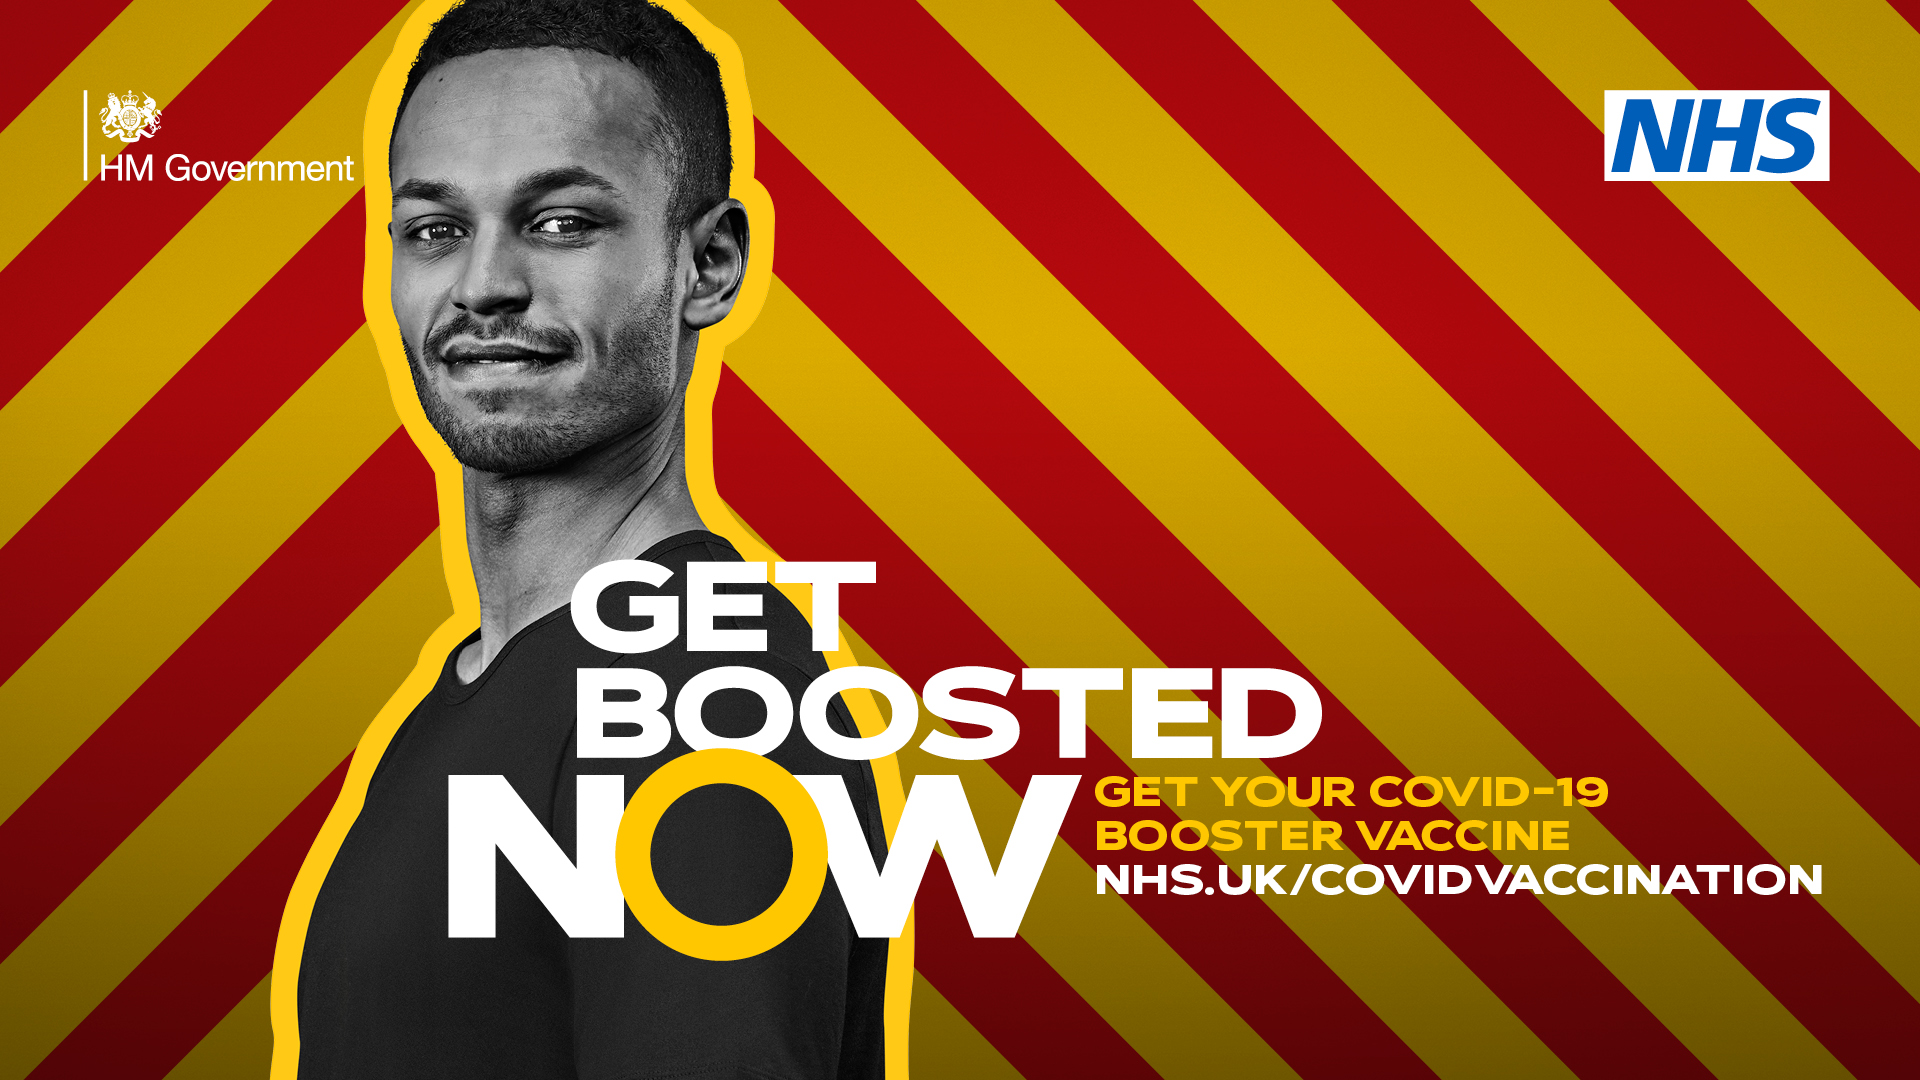 get boosted campaign poster 